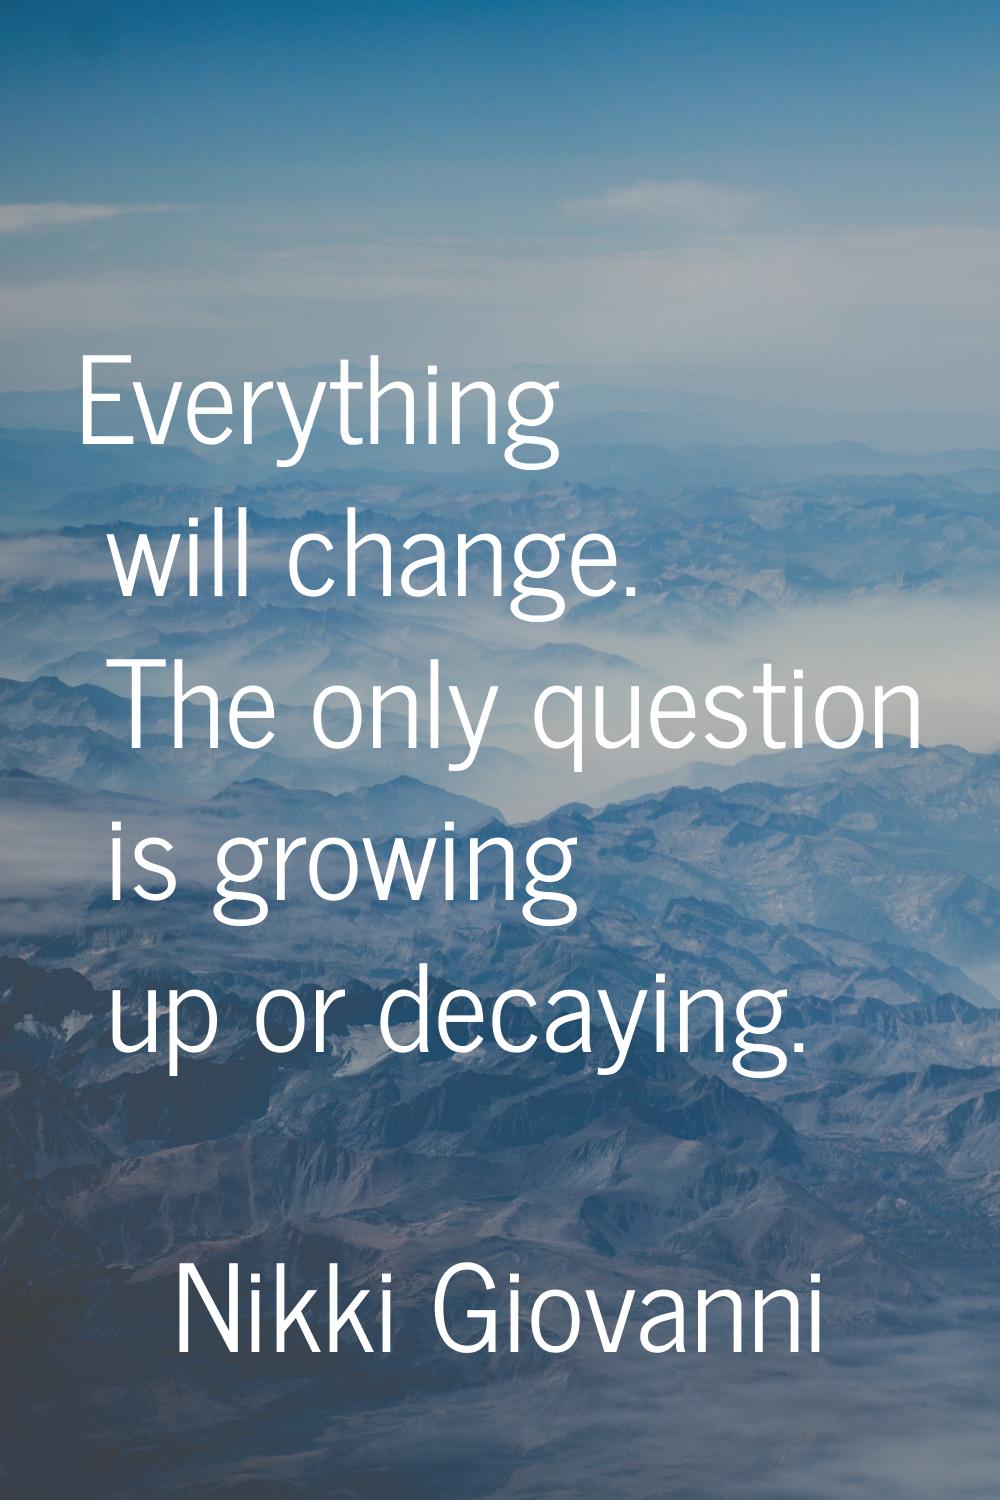 Everything will change. The only question is growing up or decaying.